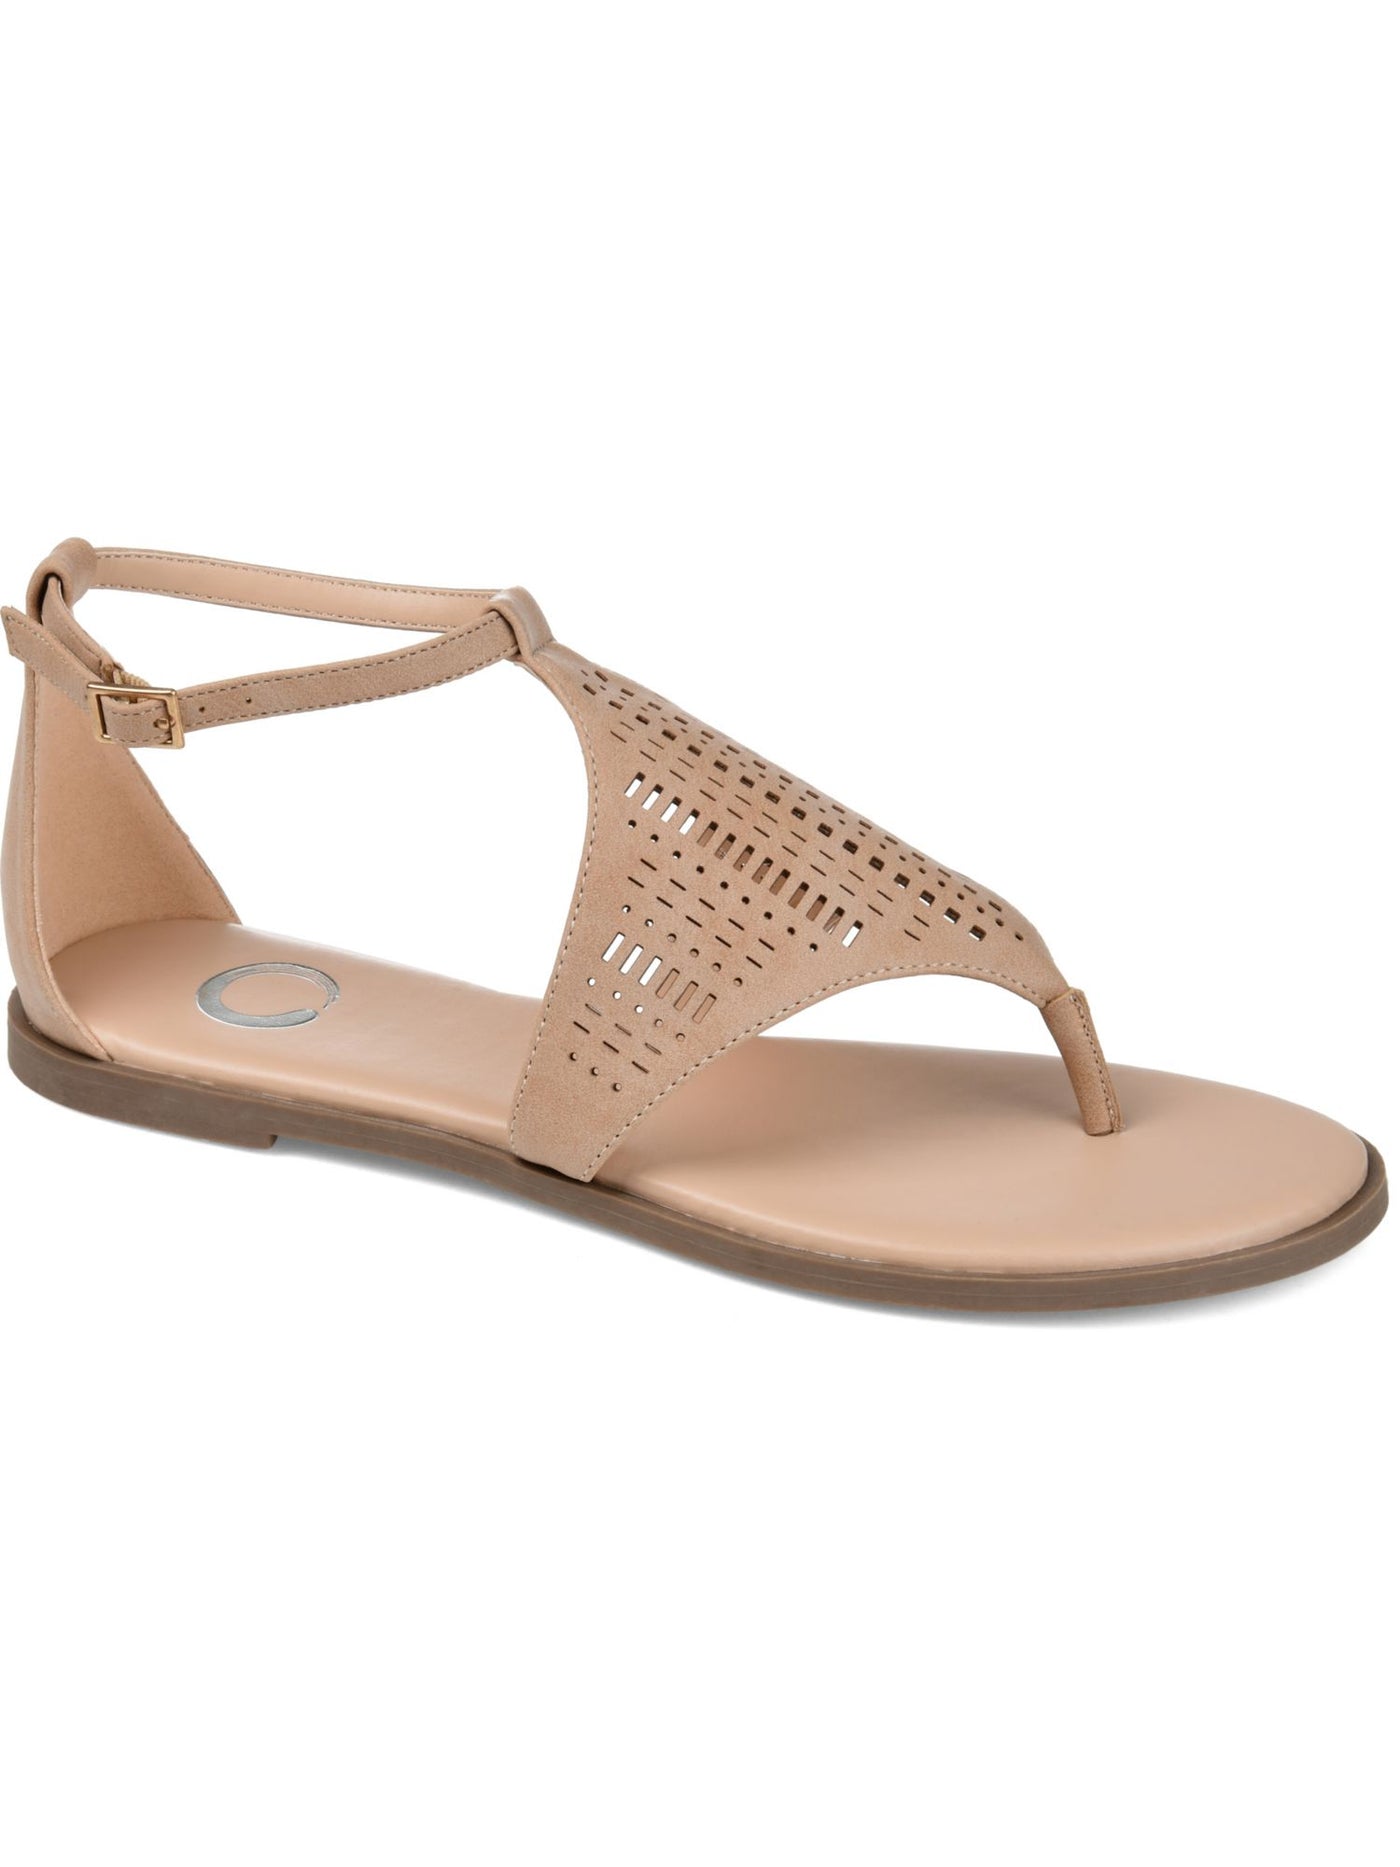 JOURNEE COLLECTION Womens Beige Laser Cut Half-Caged Design Cushioned Ankle Strap Niobi Round Toe Buckle Thong Sandals Shoes 8